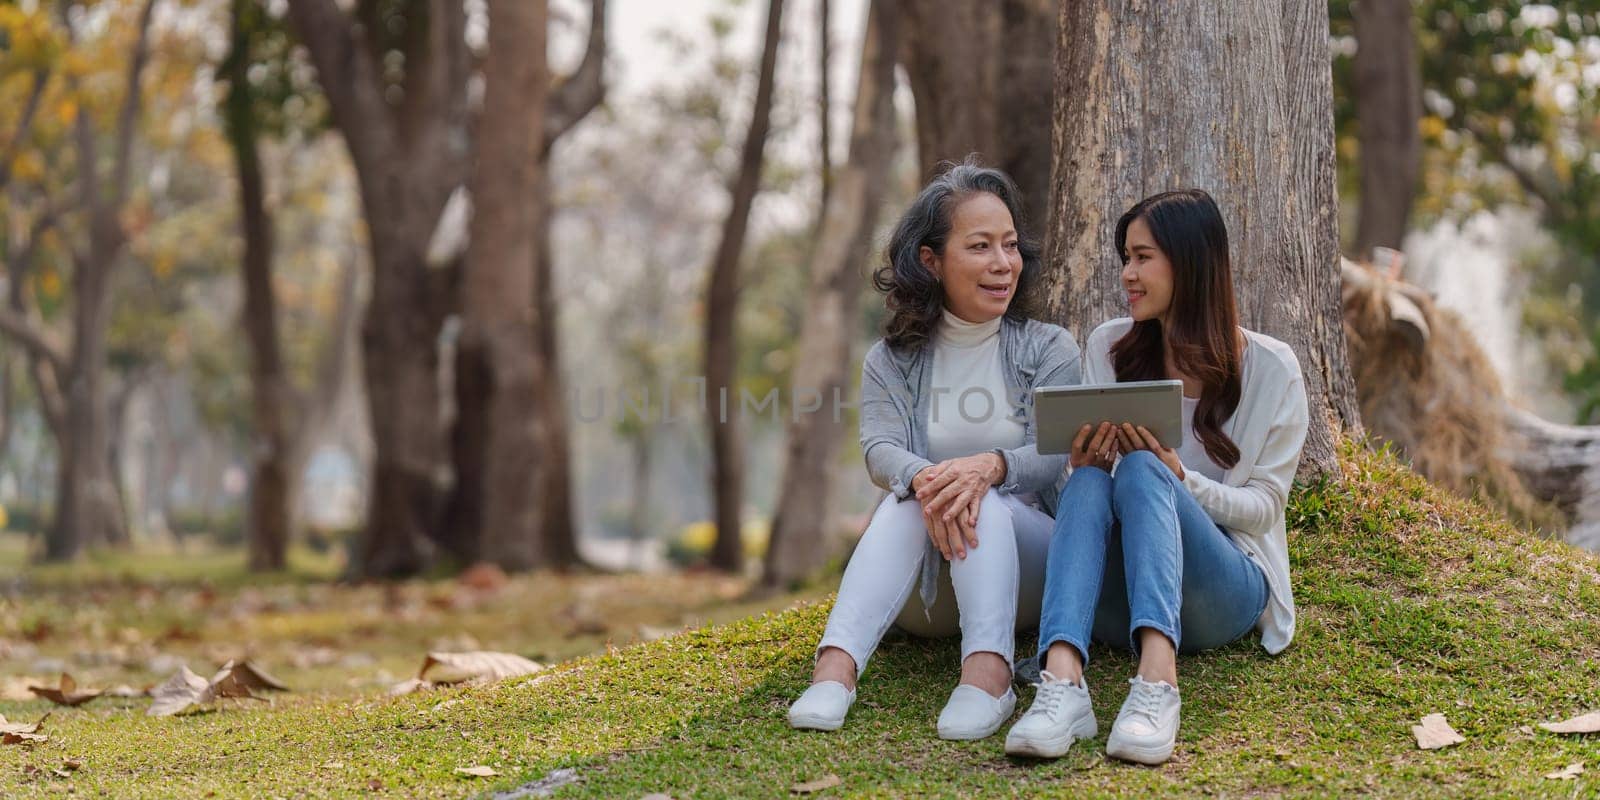 Adult daughter and her elderly mother have outdoor activity together by itchaznong